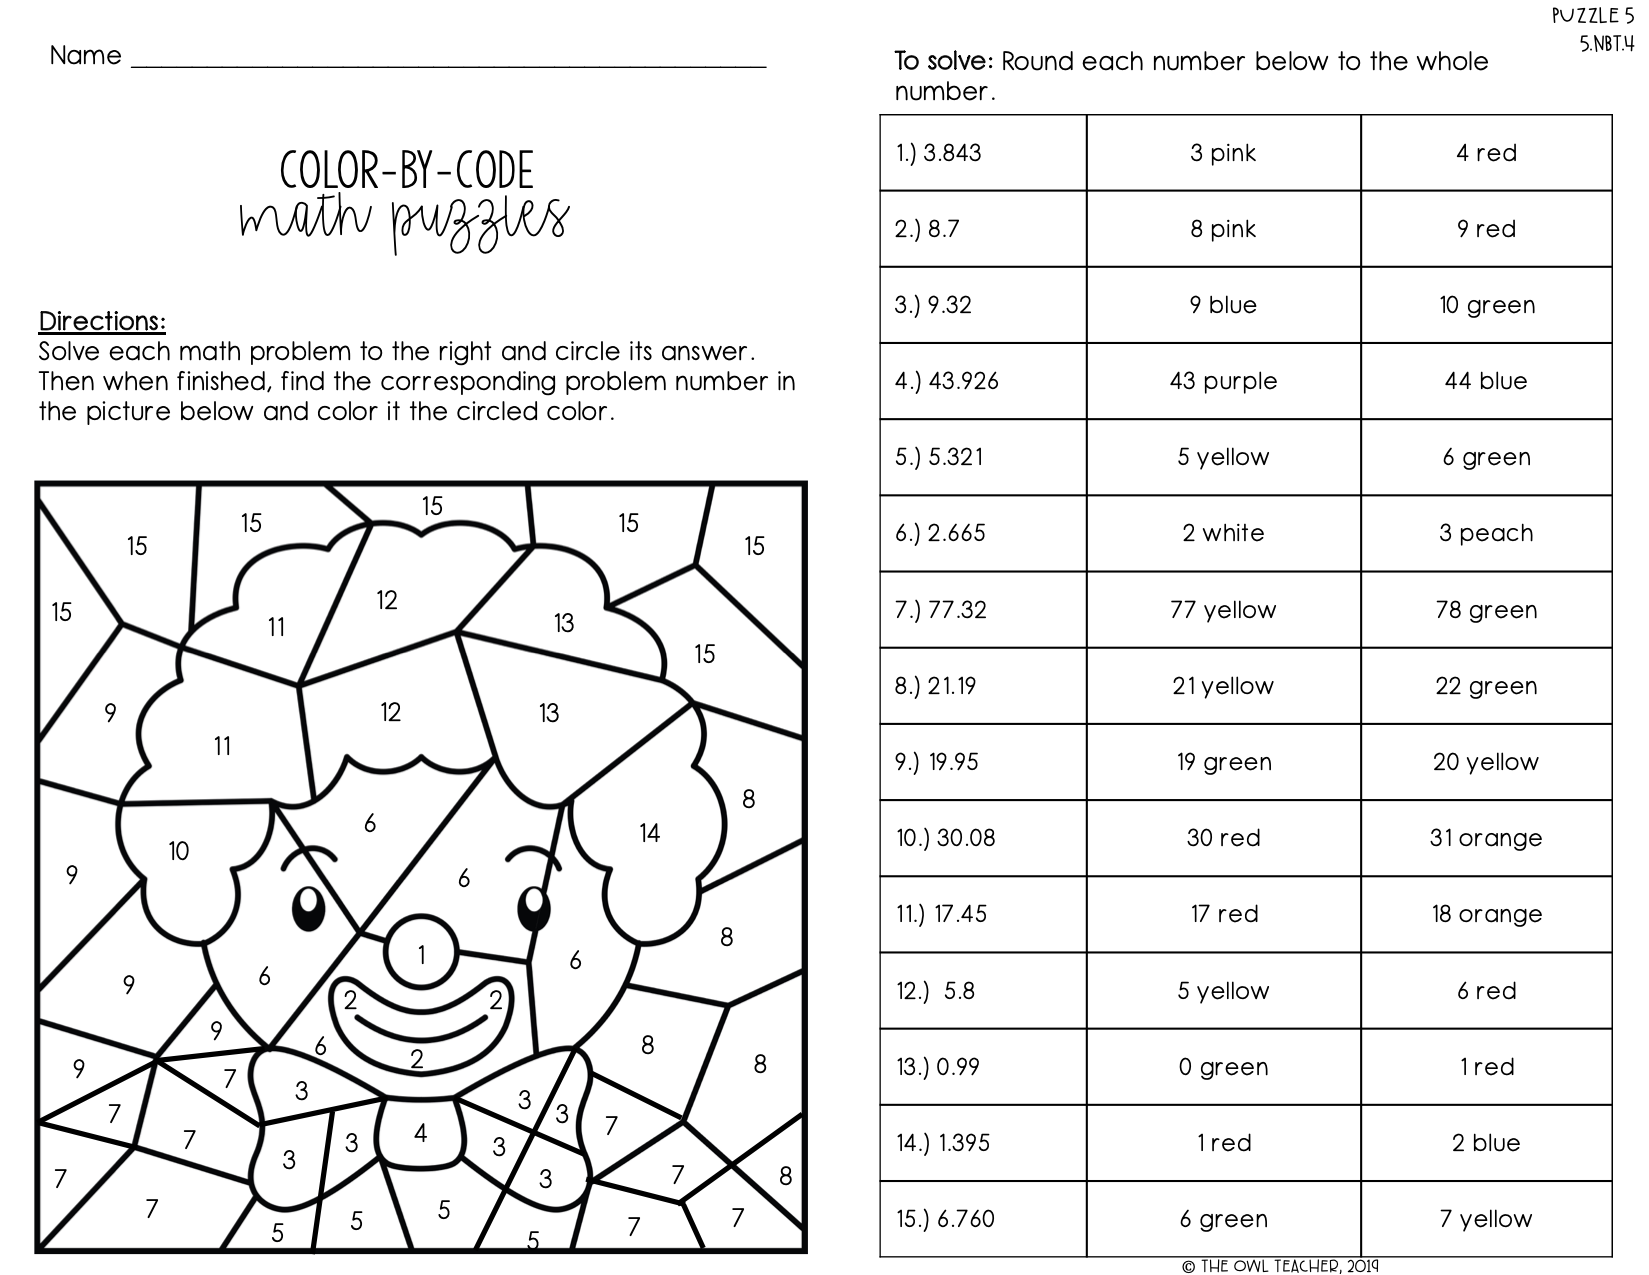 Rounding to One Decimal Place Coloring Puzzle by Arithmetints